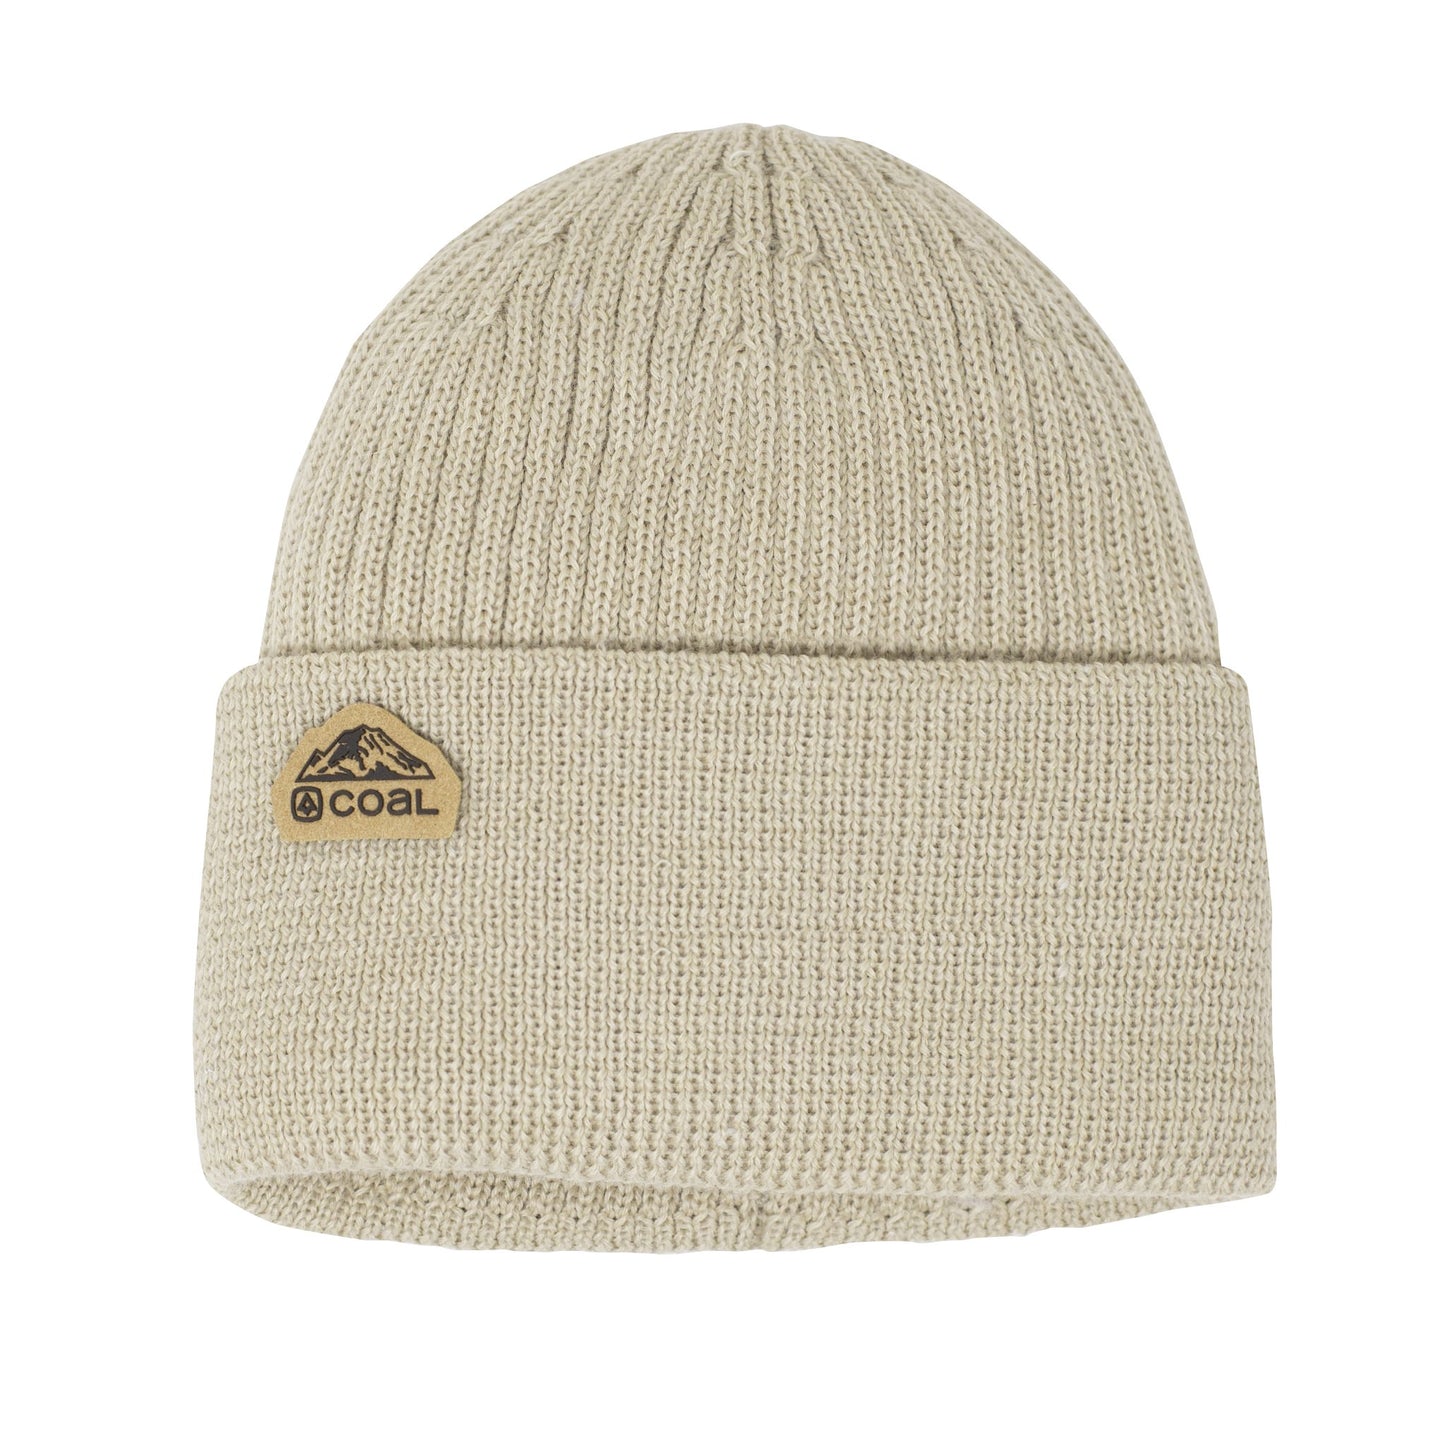 Coal - The Coleville Recycled Cuff Beanie